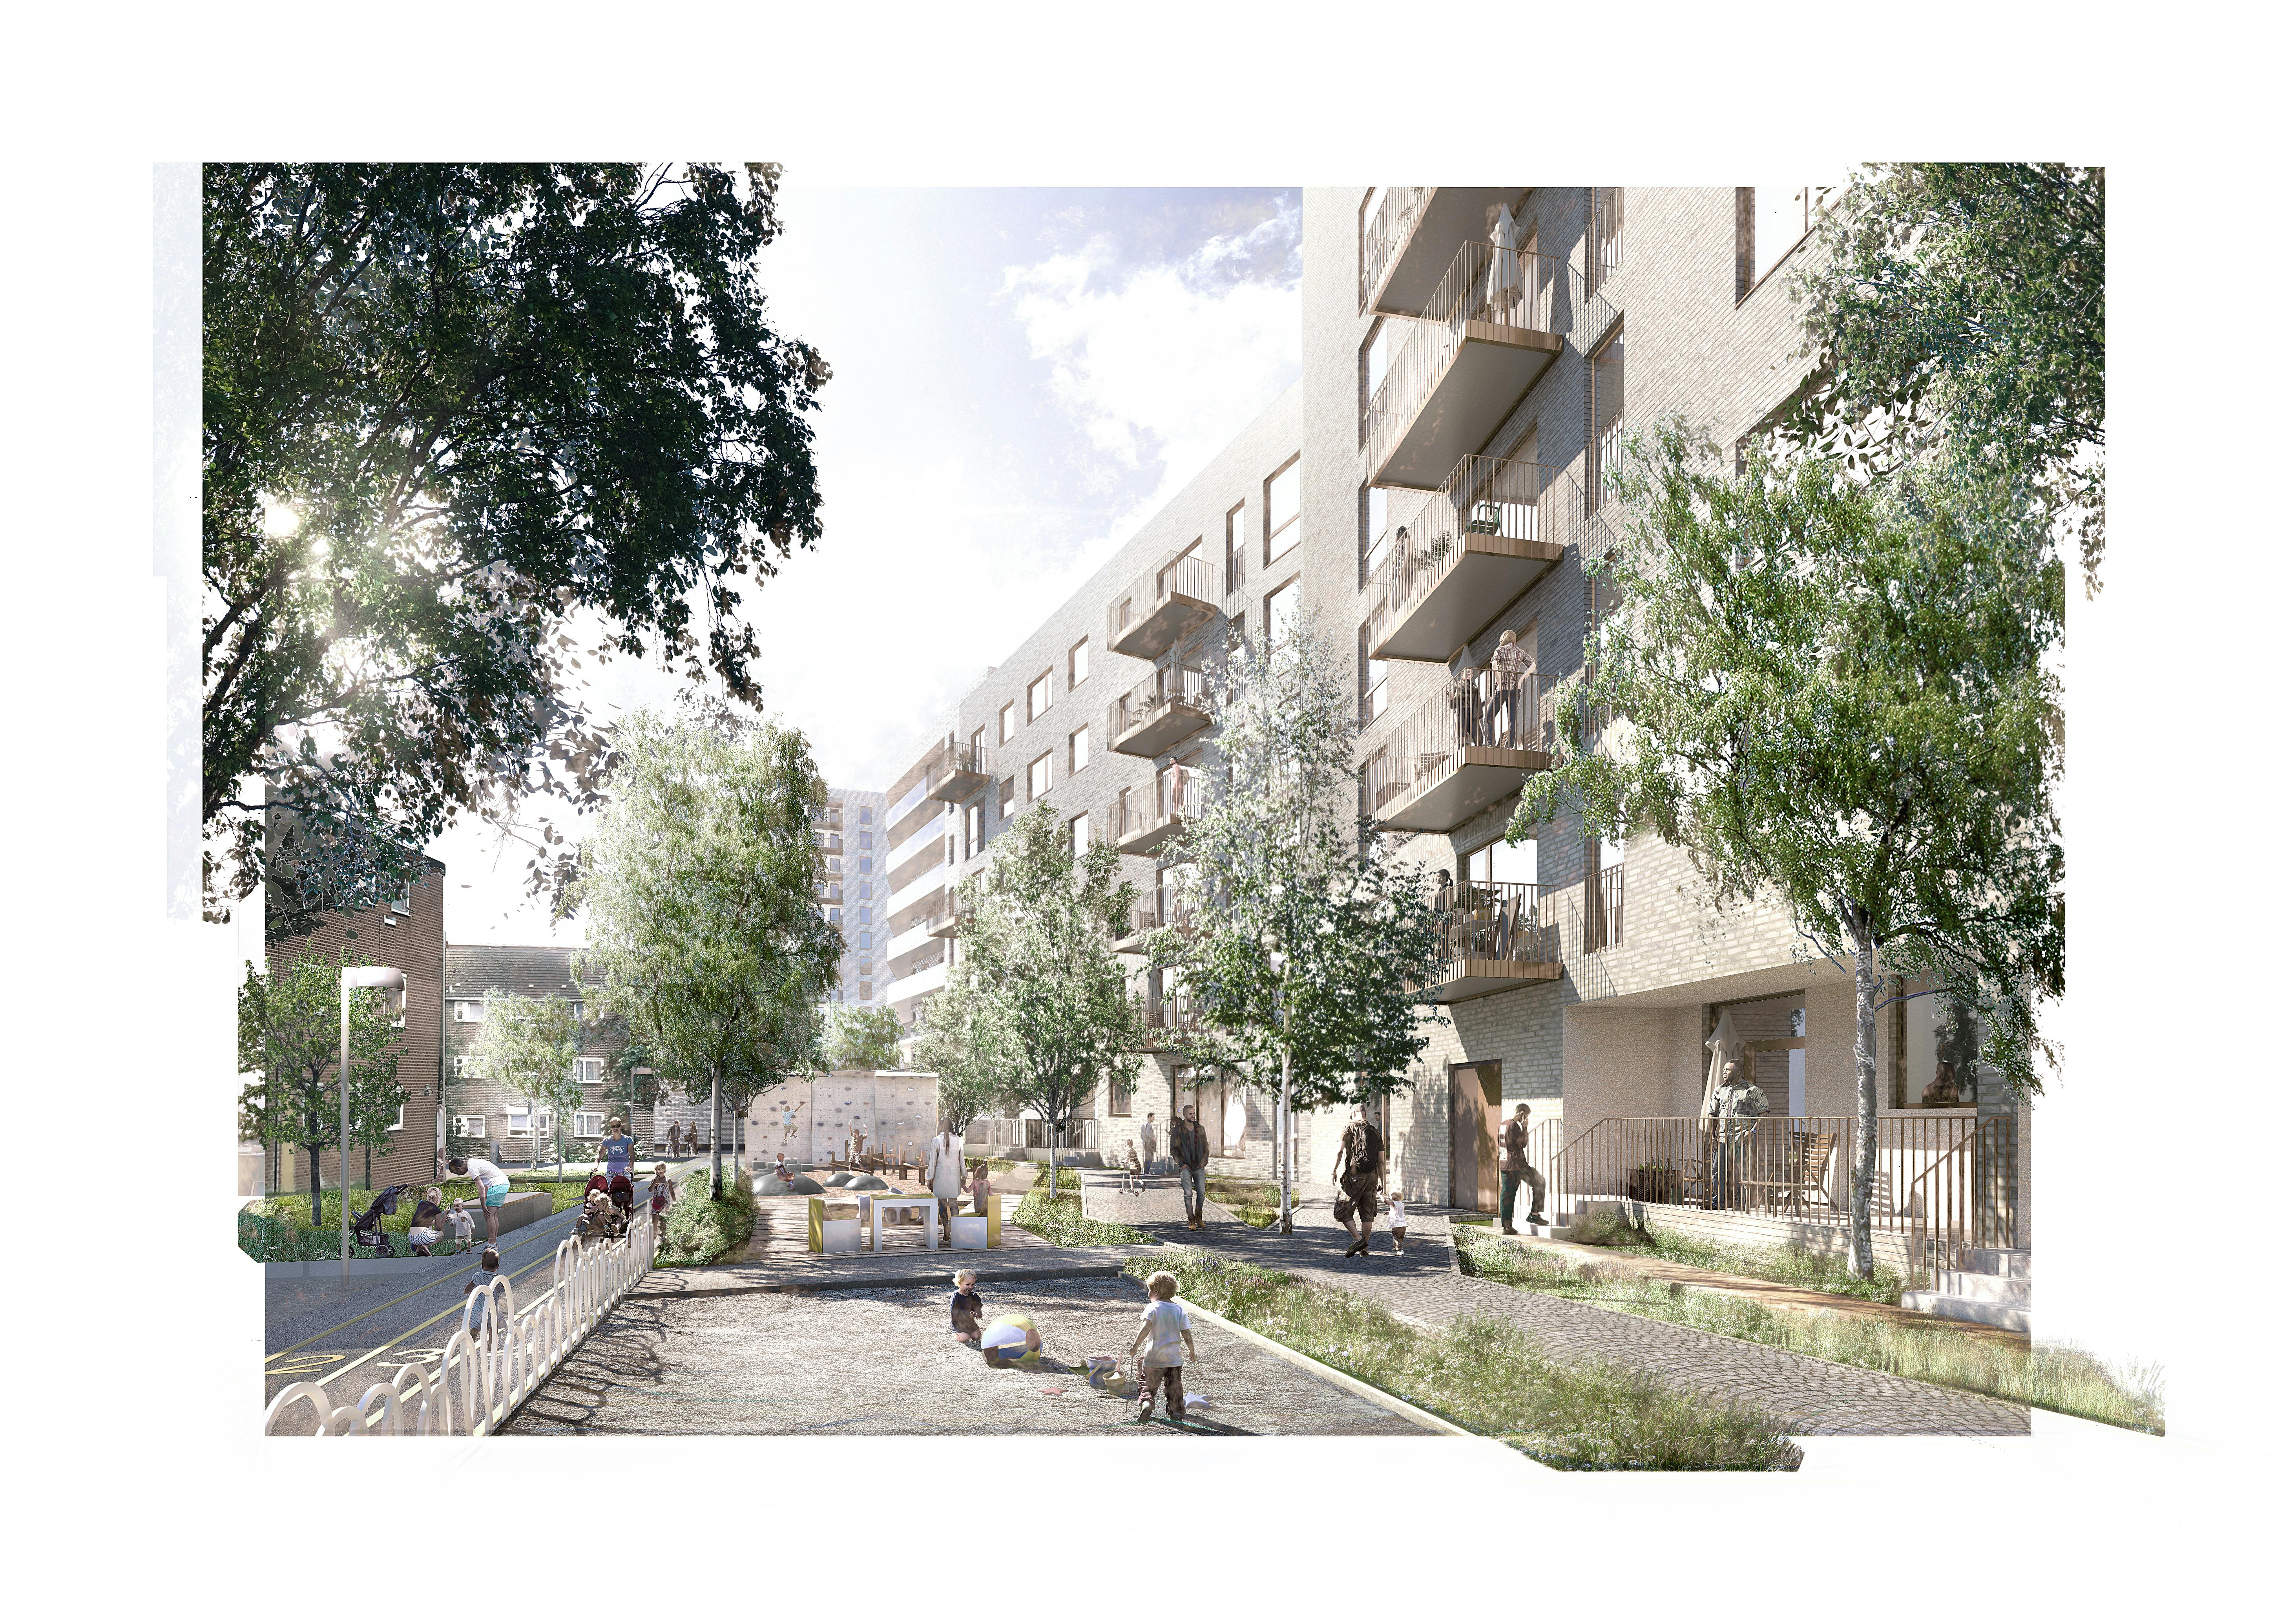 Artist's impression of the view of the courtyard by Block A